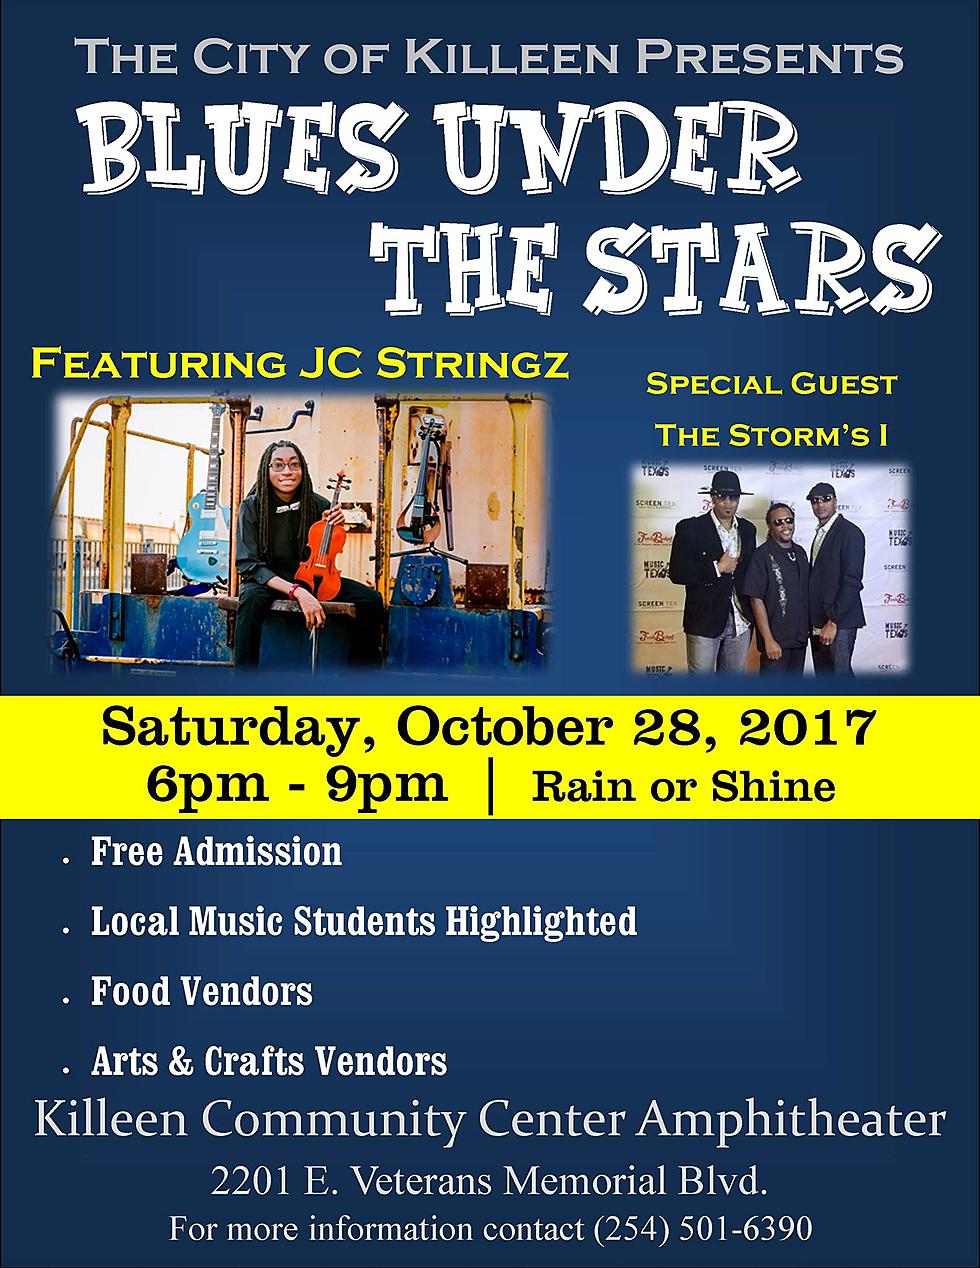 Killeen’s Blues Under The Stars Featuring J.C. Stringz